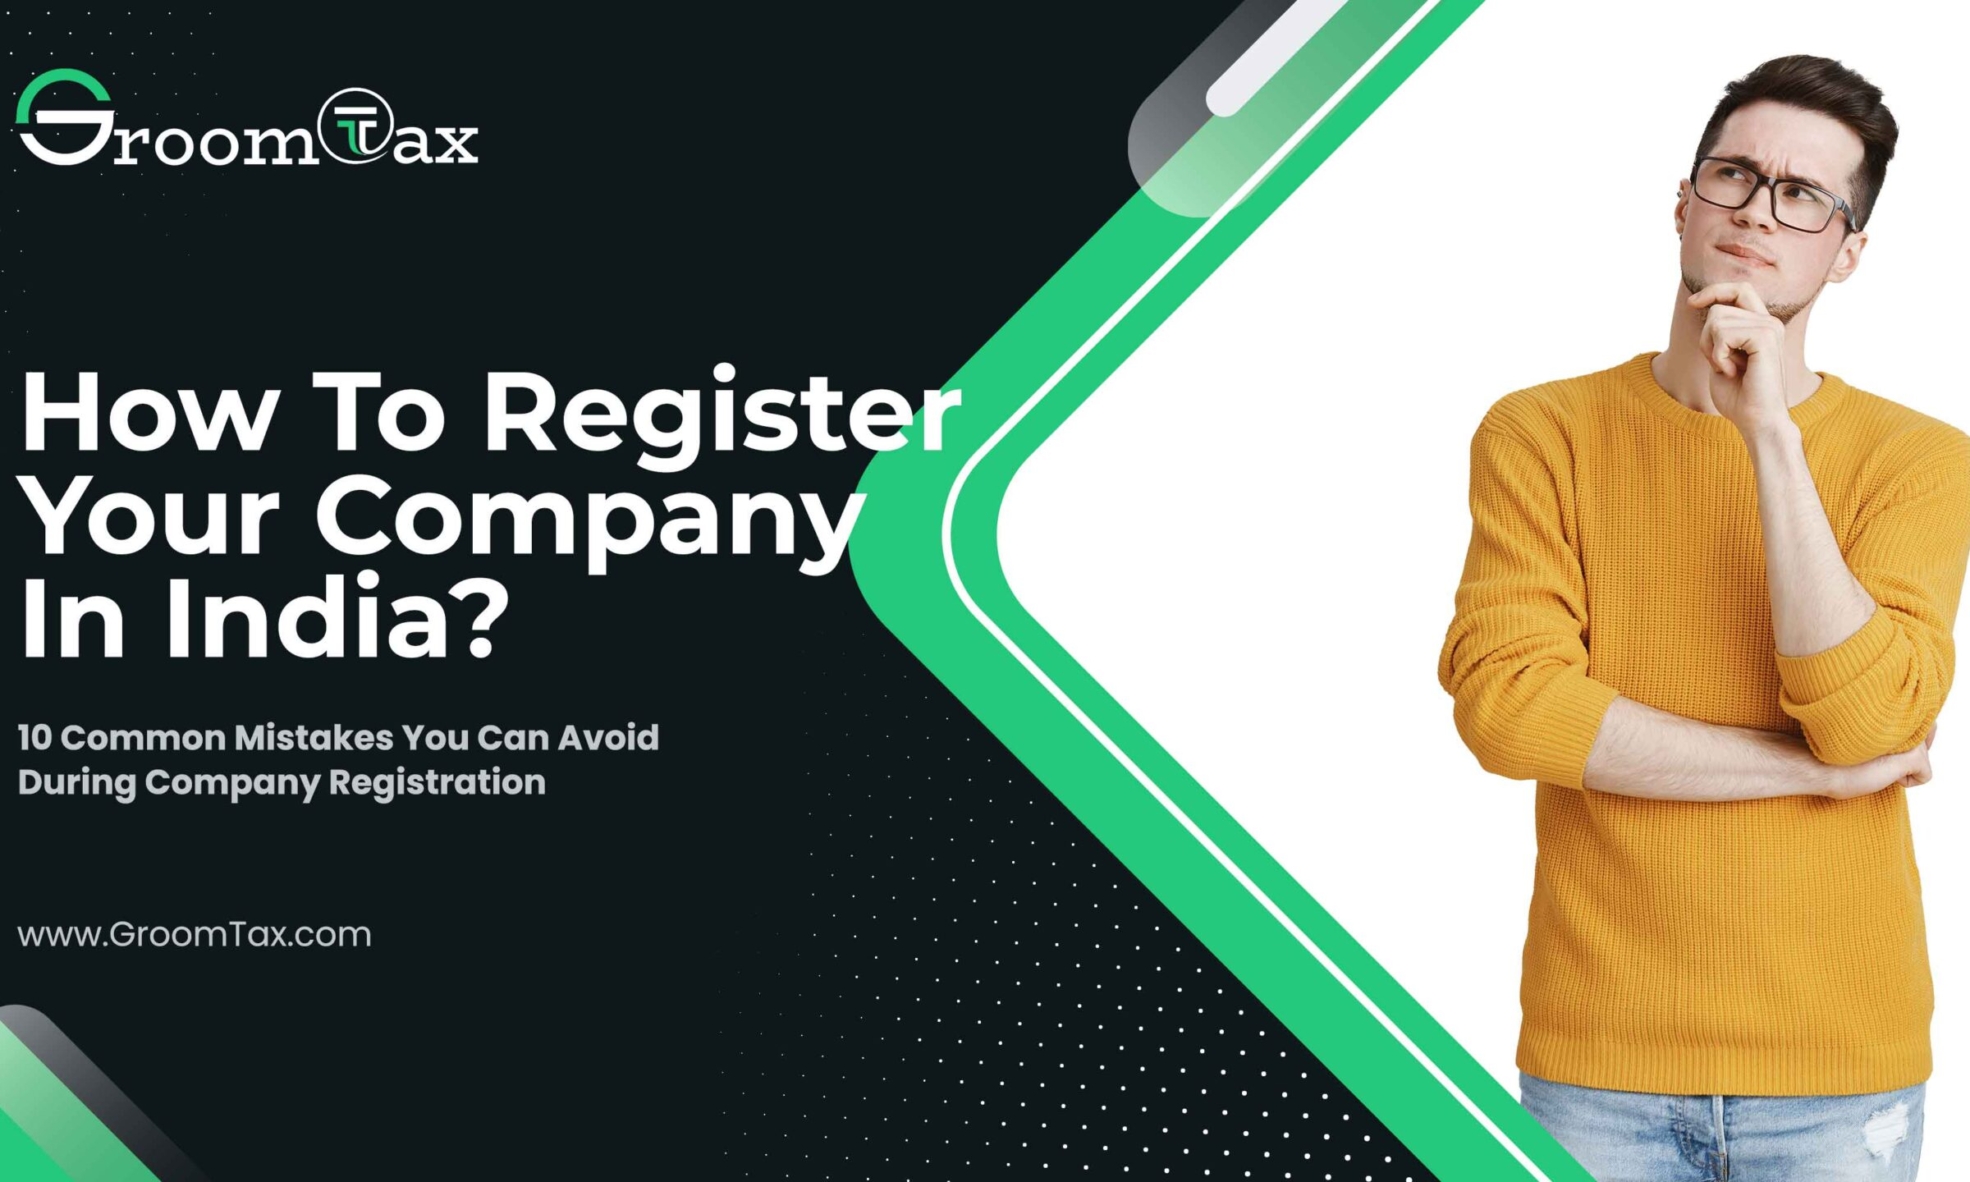 How To Register Your Company In India And What Are The 10 Common Mistakes You Can Avoid During Company Registration?